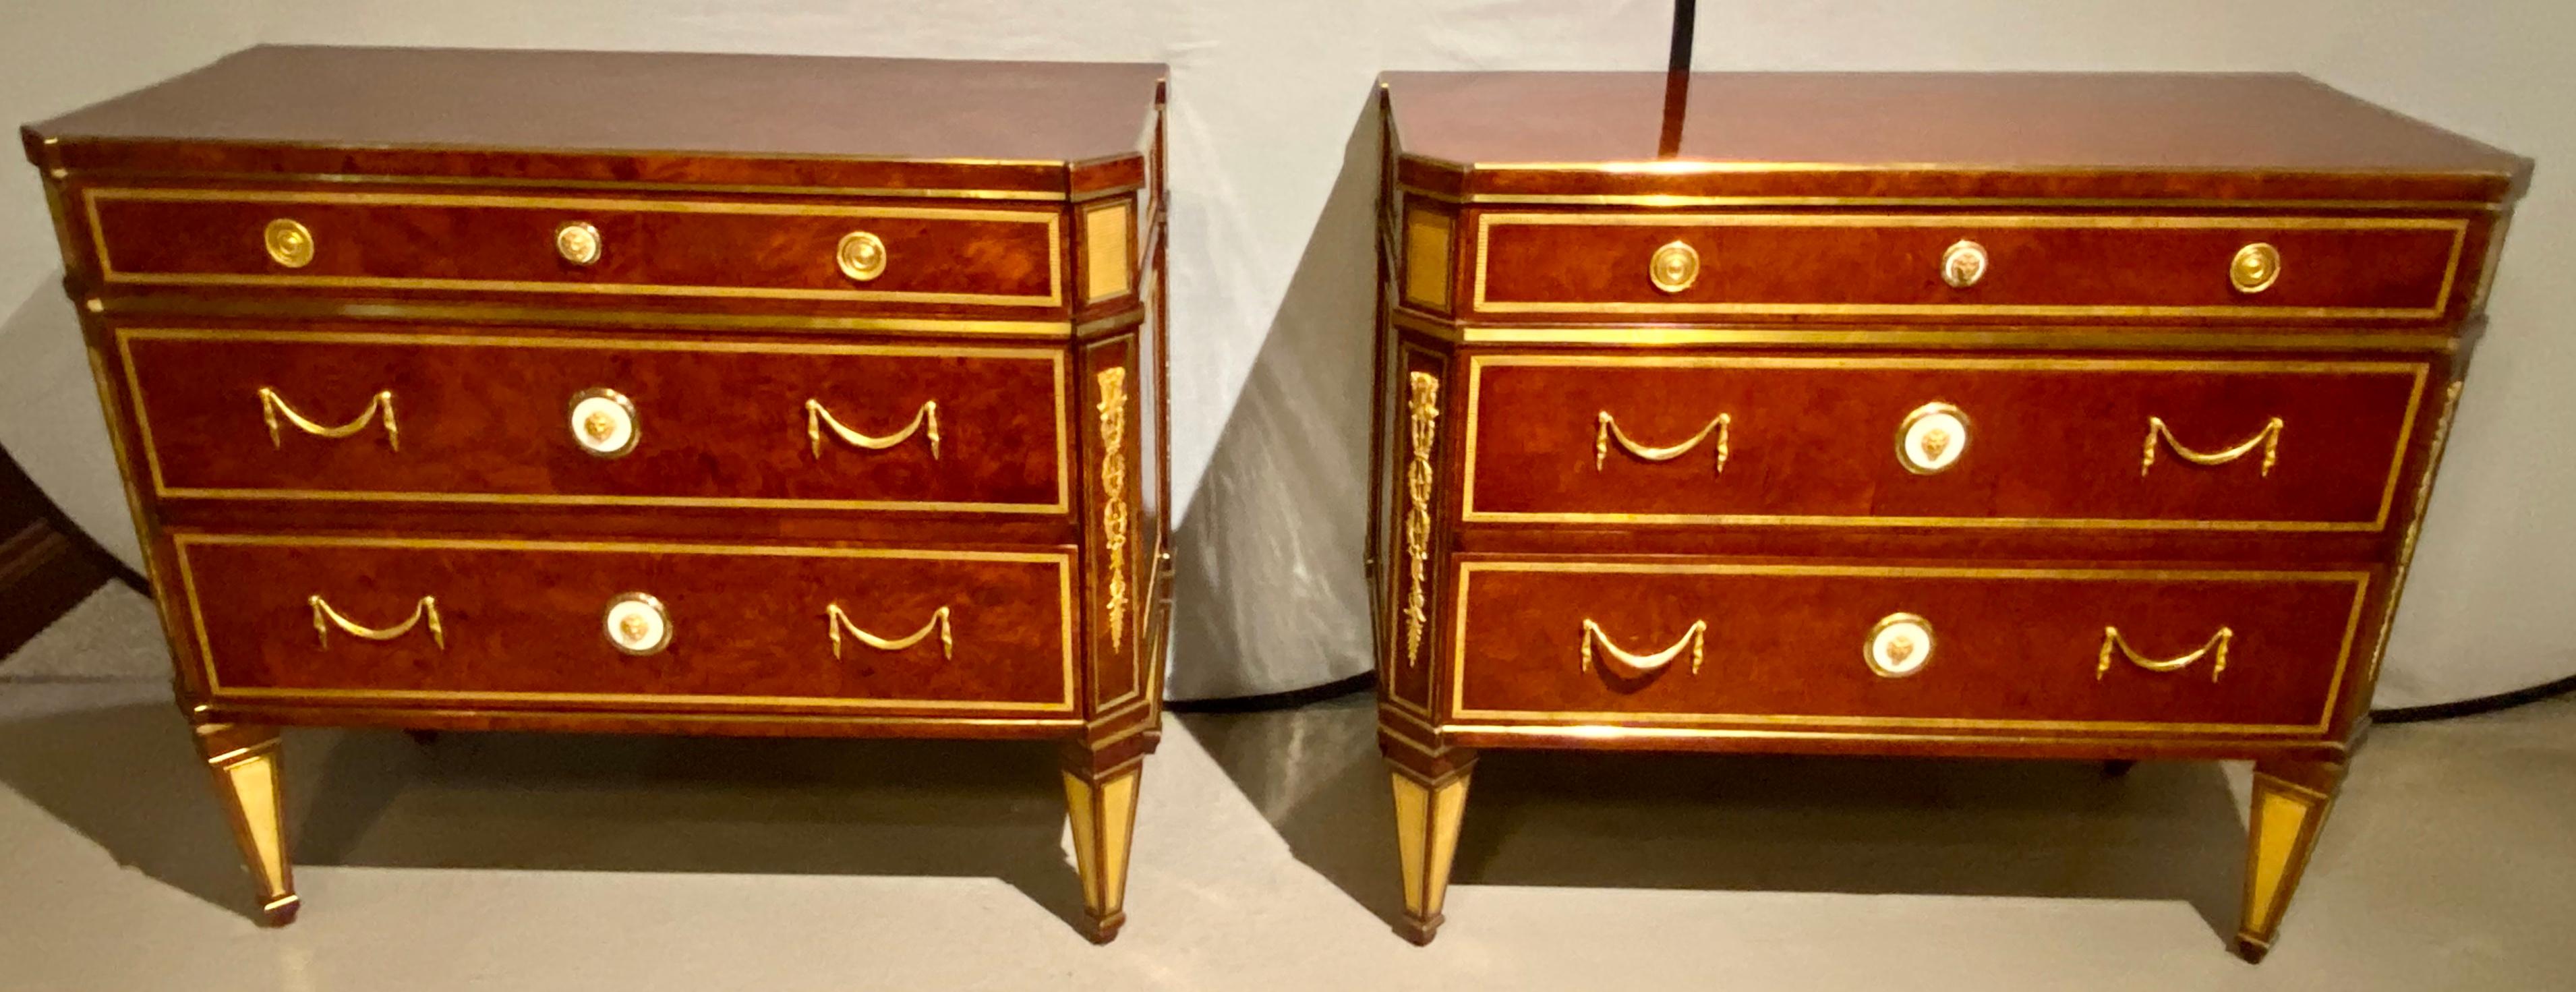 Neoclassical, Rare Commodes, Tortoise Shell Veneer, Bronze, Baltic States, 1880s For Sale 5